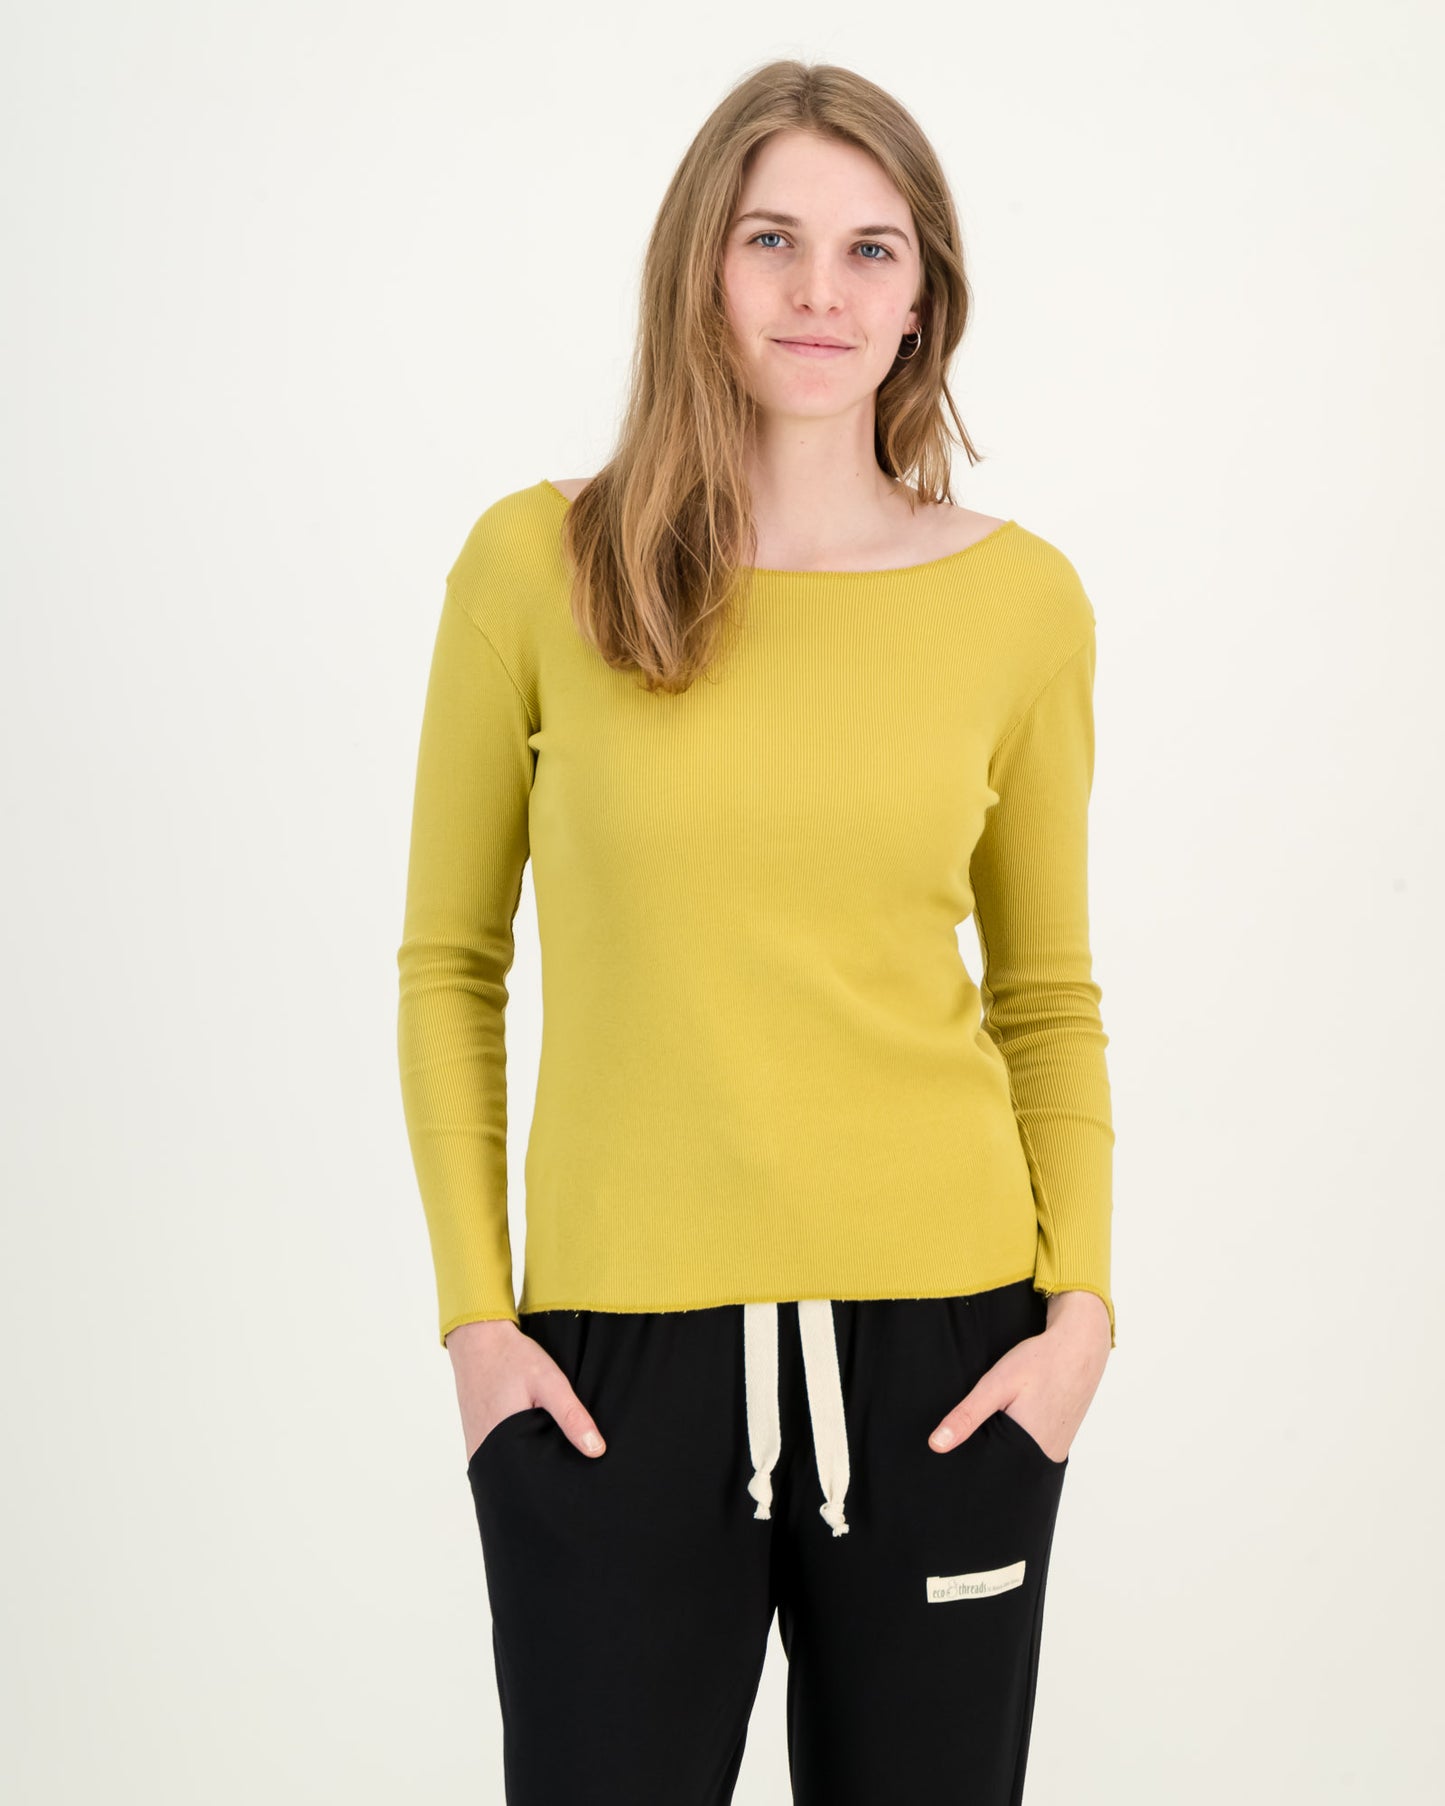 Overdyed Cotton Rib Top - Chartreuse